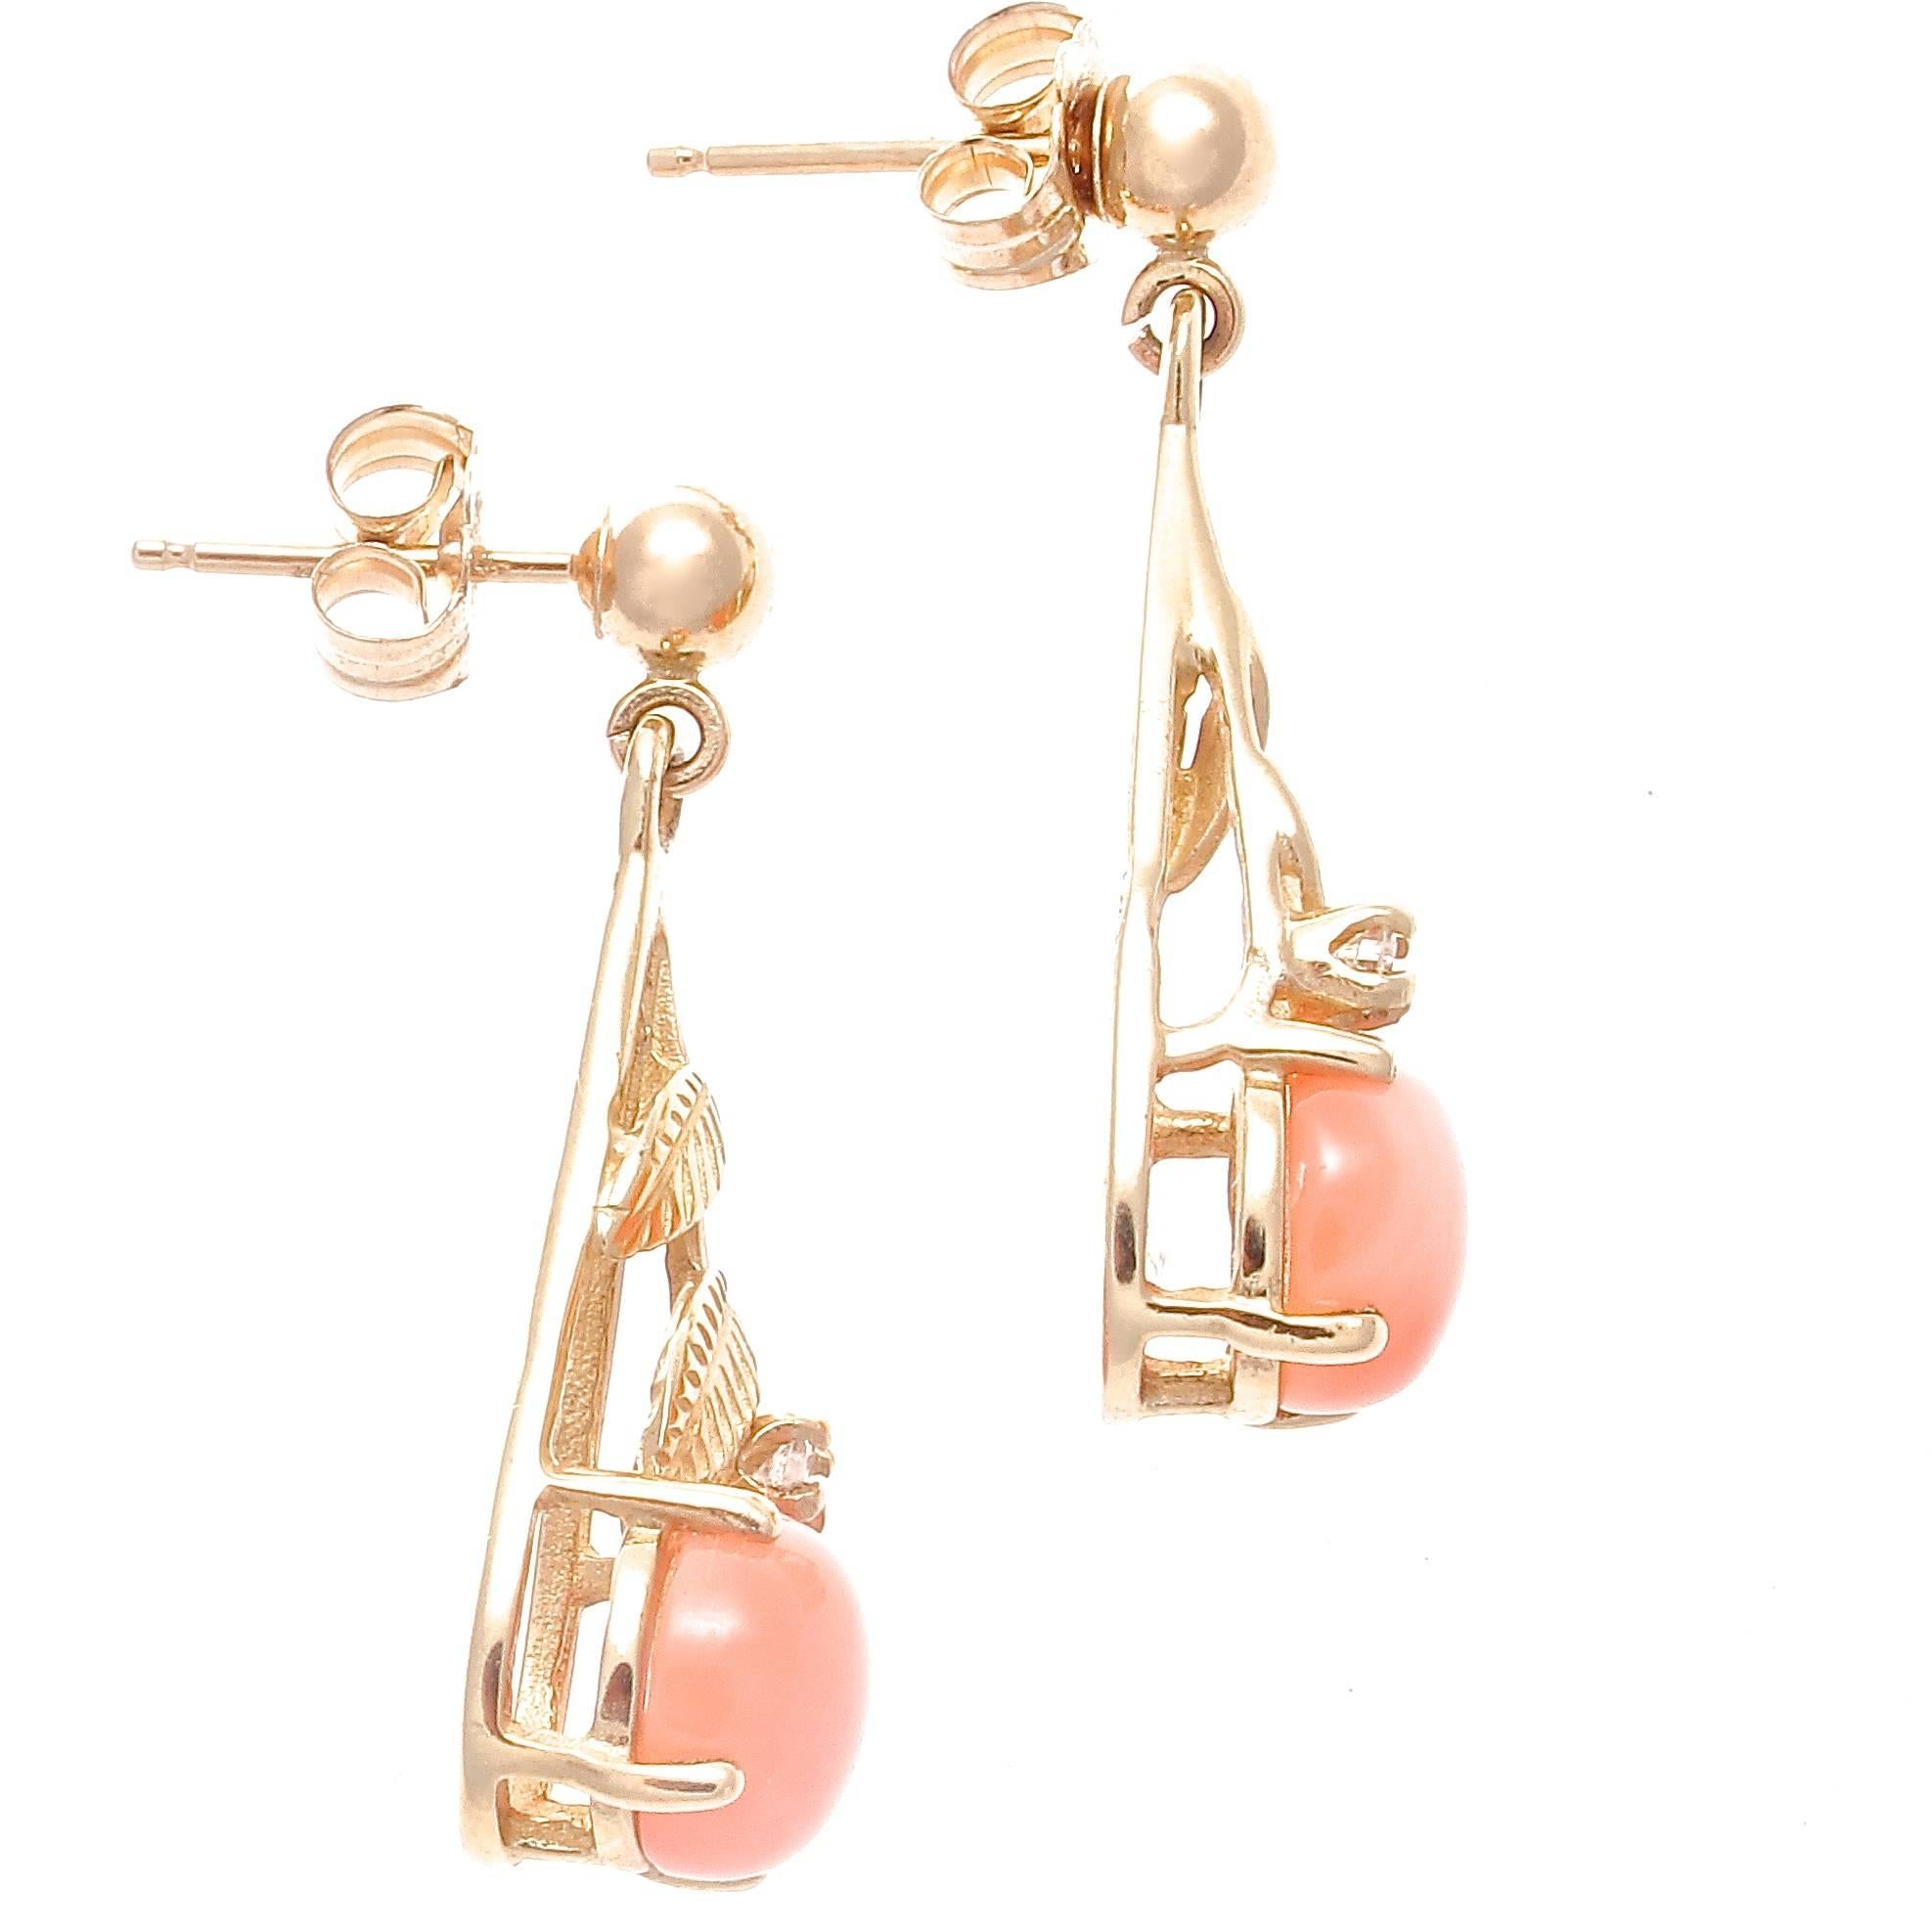 A creative and attractive pair of earrings that can be worn anytime.. Featuring angel skin button coral drops that hang from 14k gold accented by a single near colorless diamond. 